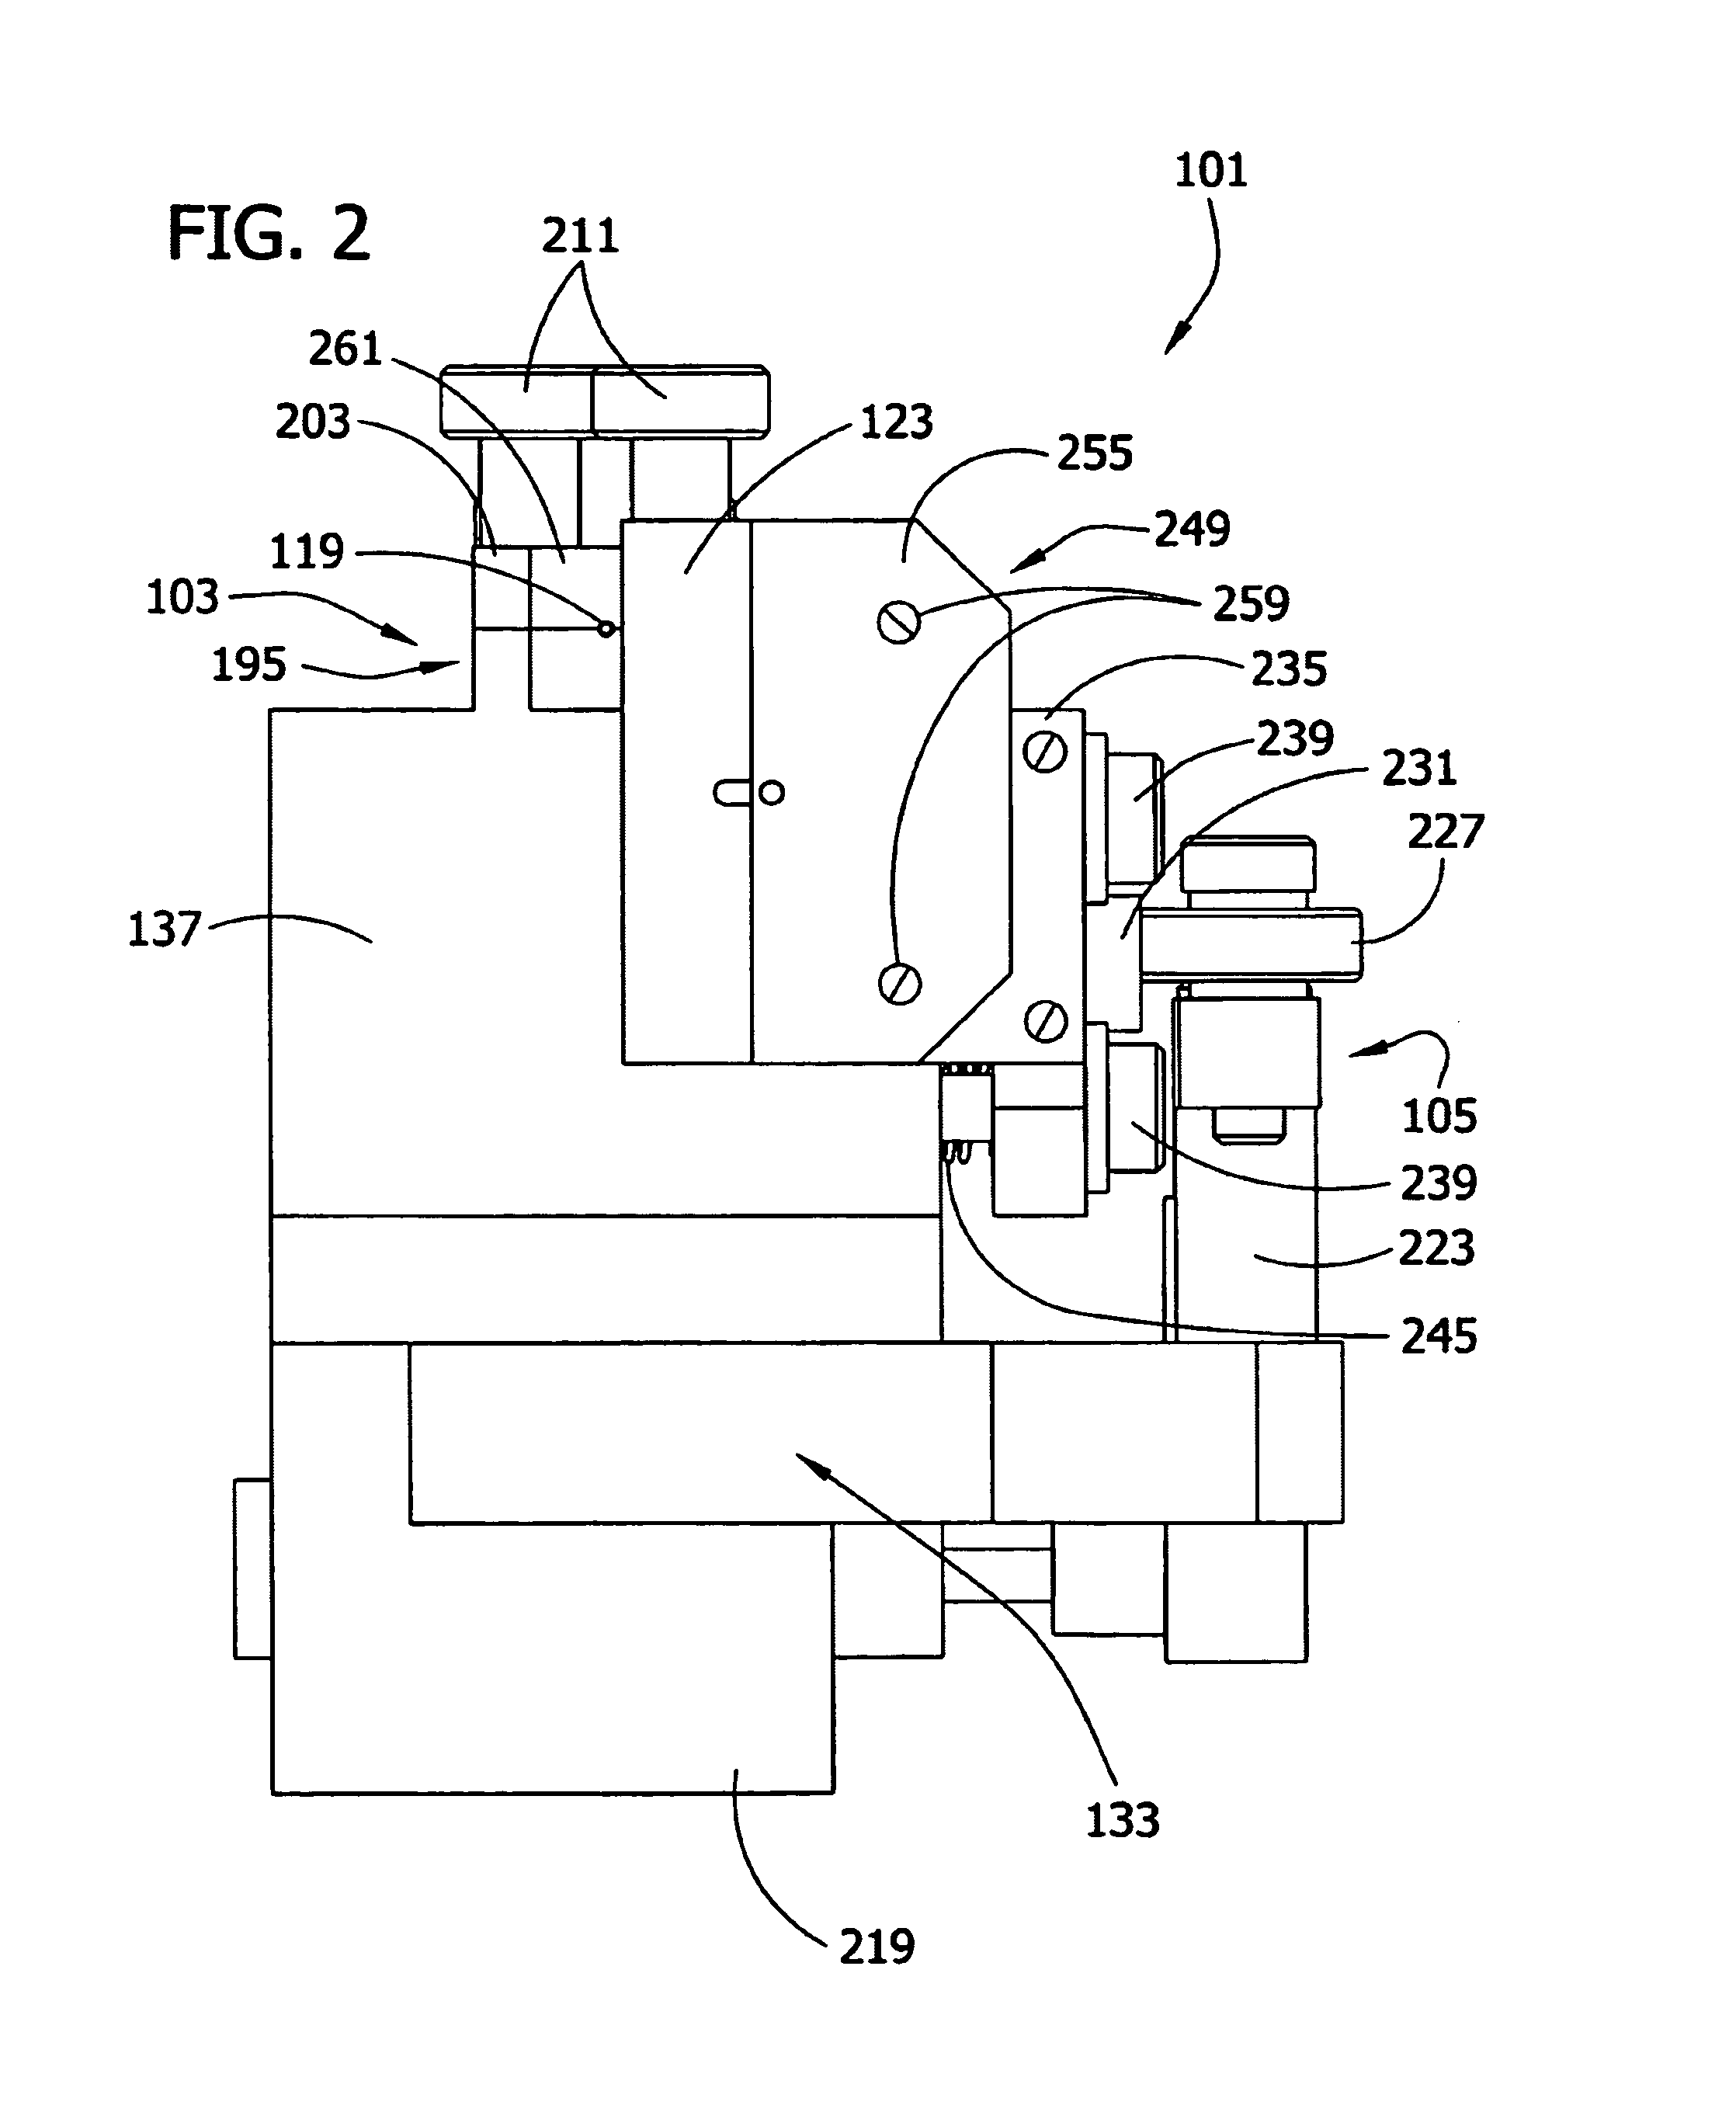 Self-assembling cell aggregates and methods of making engineered tissue using the same